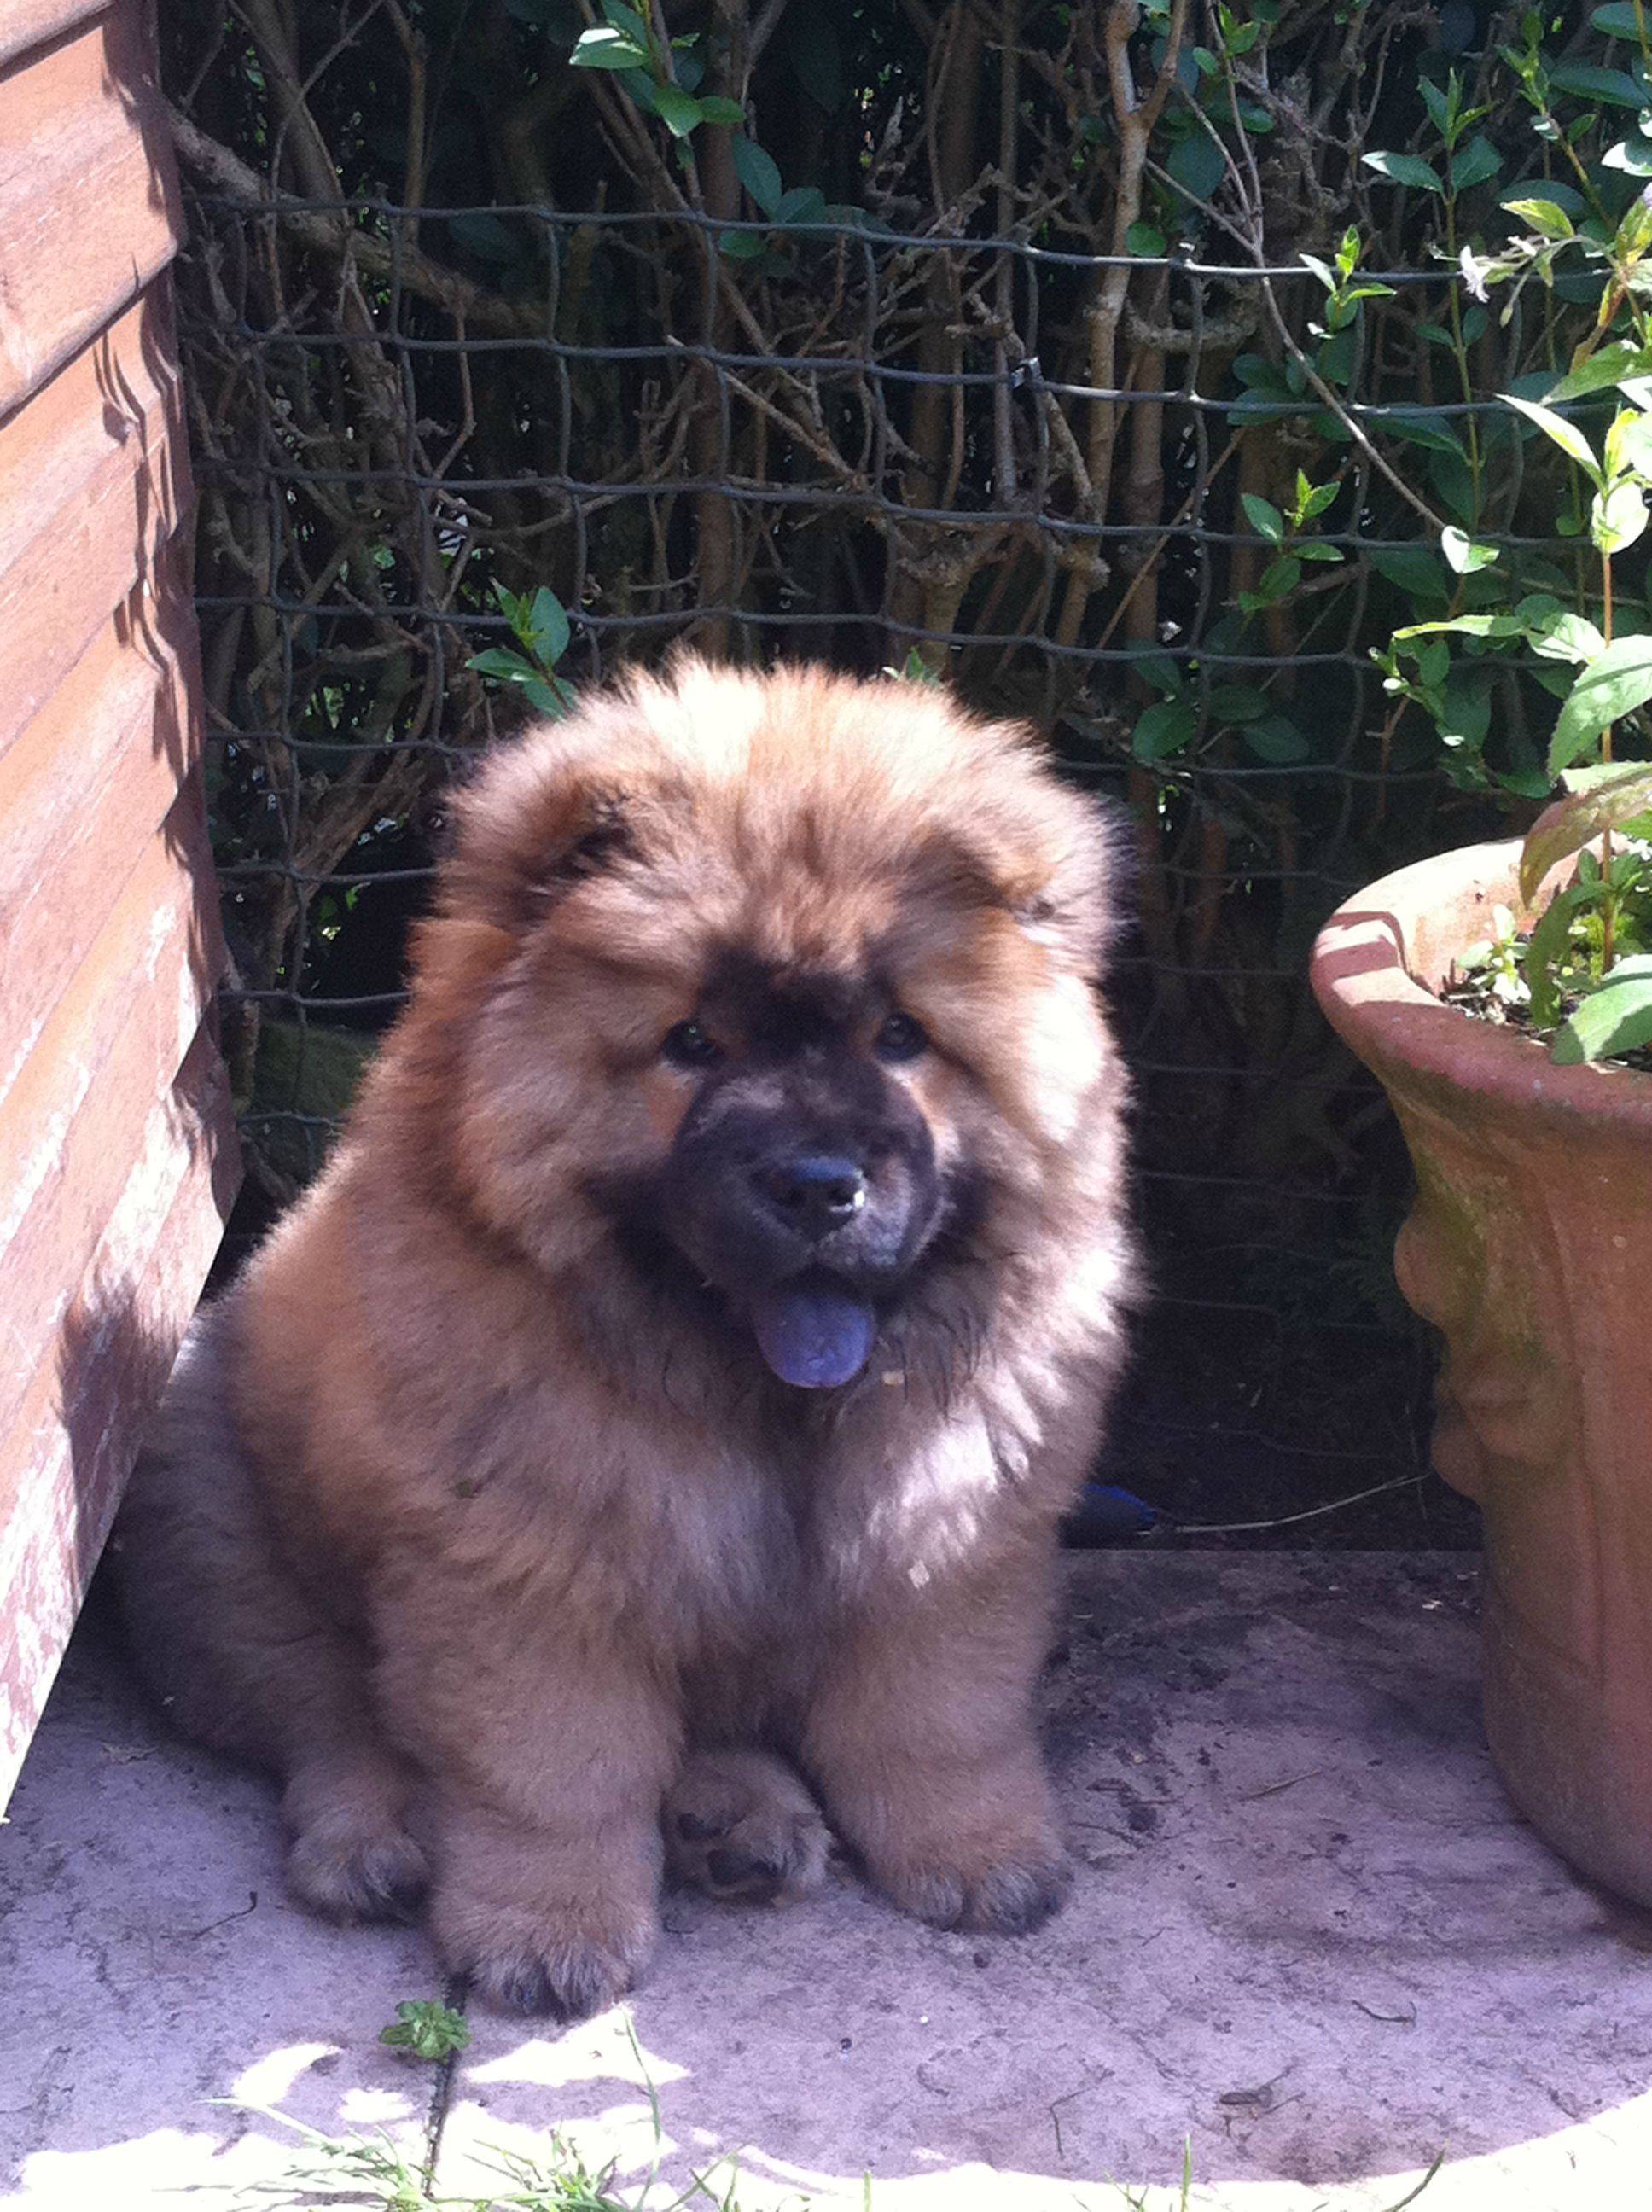 My friend's “TEDDY BEAR PUPPY DOG” | Funny Pictures, Quotes, Pics, Photos,  Images. Videos of Really Very Cute animals.